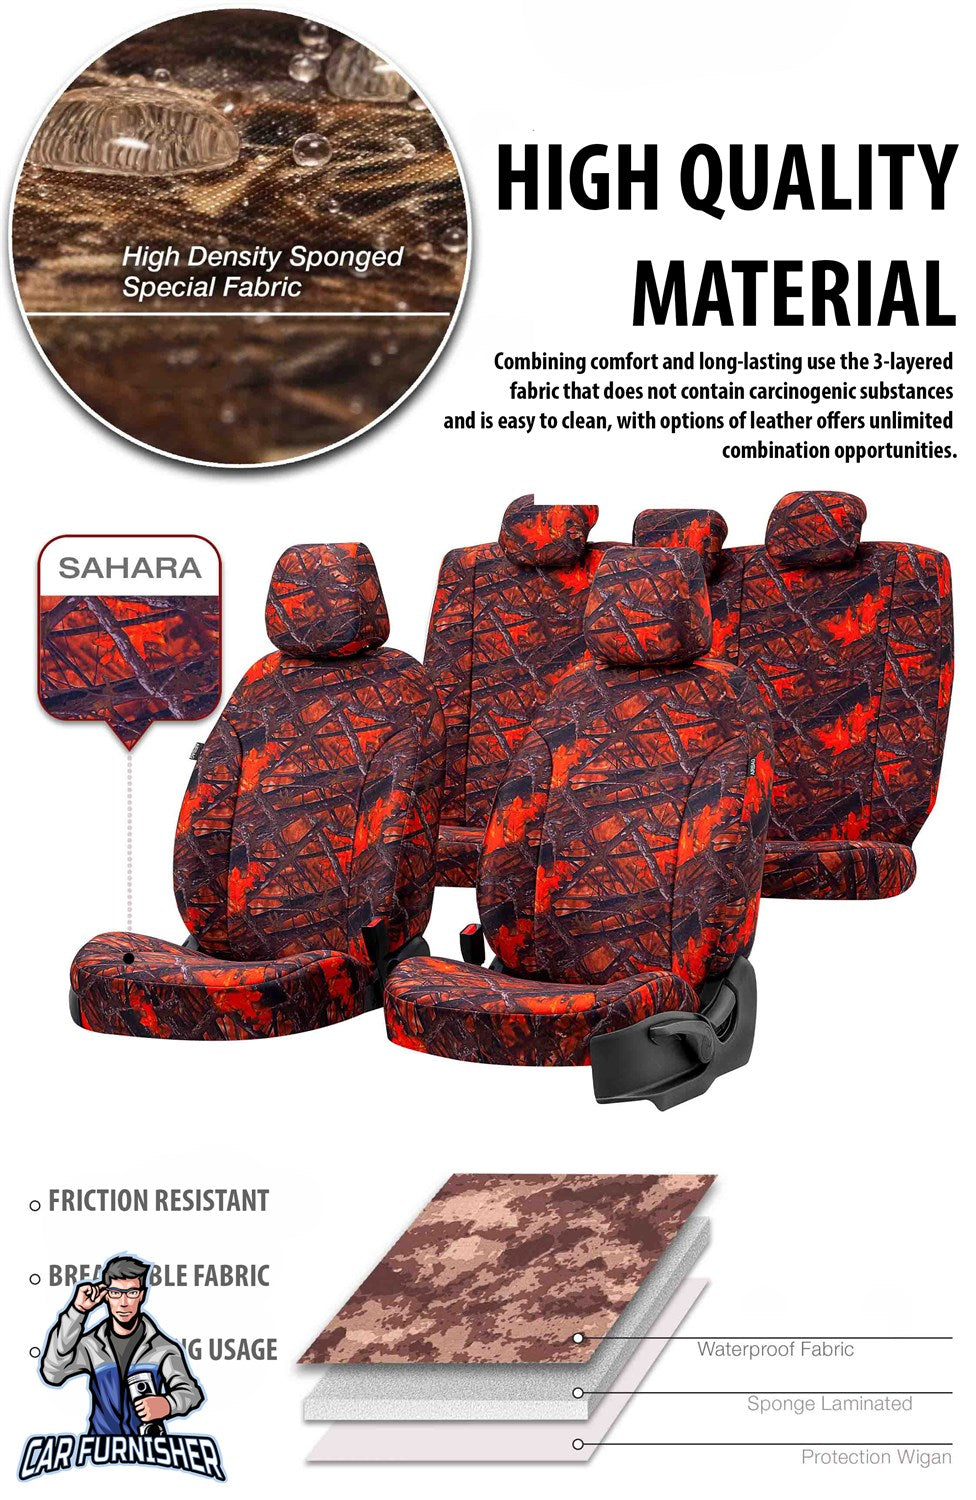 Iveco Stralis Seat Cover Camouflage Waterproof Design Montblanc Camo Front Seats (2 Seats + Handrest + Headrests) Waterproof Fabric